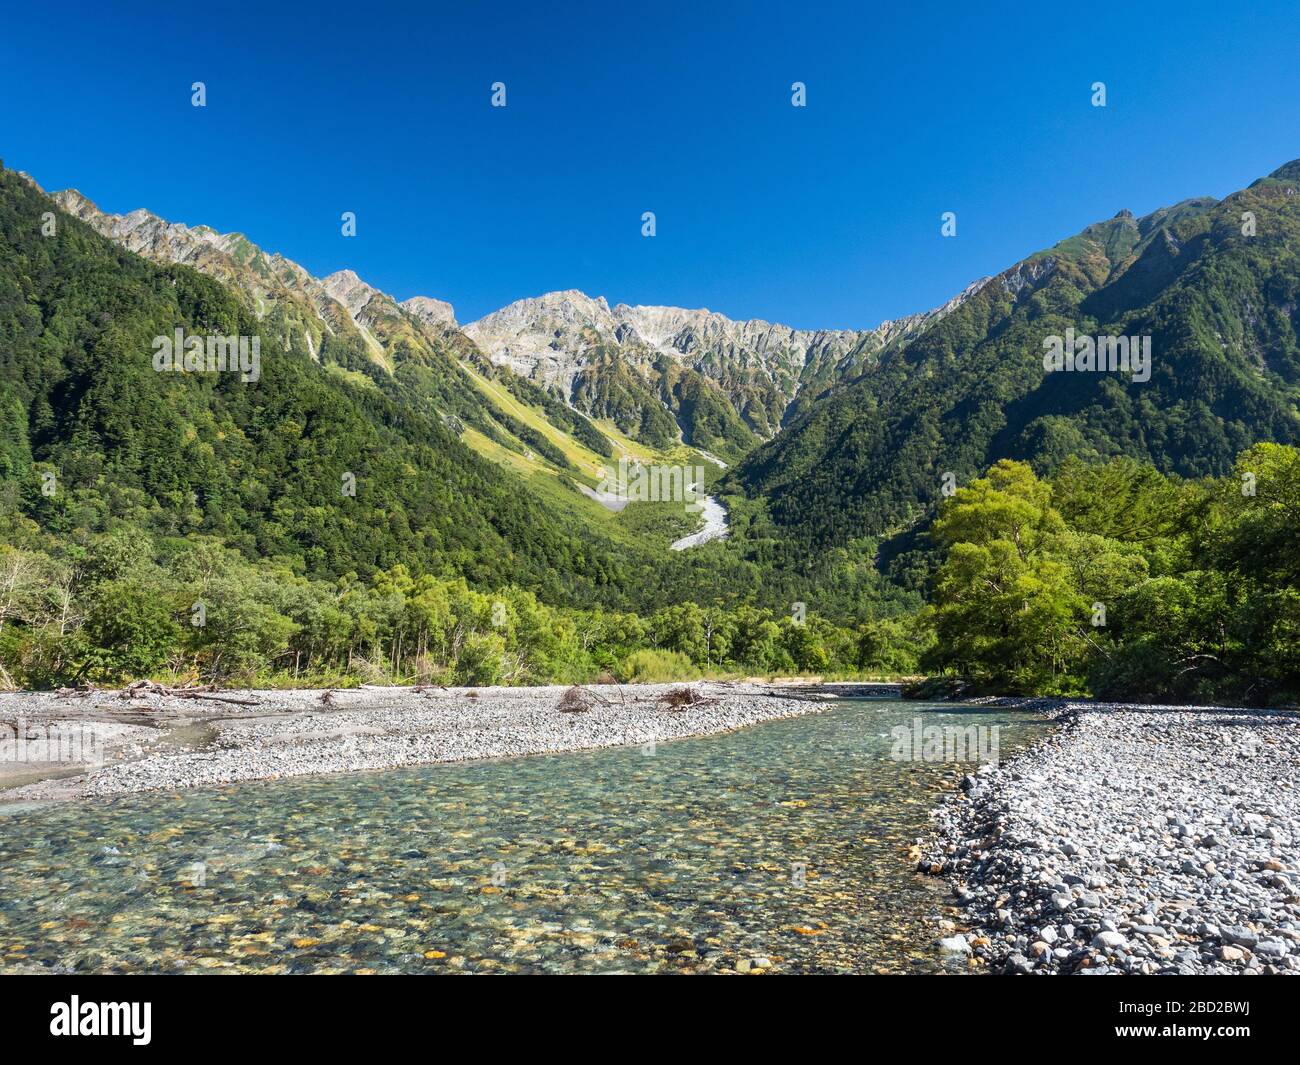 Mount Hotaka and River Azusa in Kamikōchi (the Upper Highlands) in the Hida Mountains, Nagano Prefecture, Japan. Stock Photo